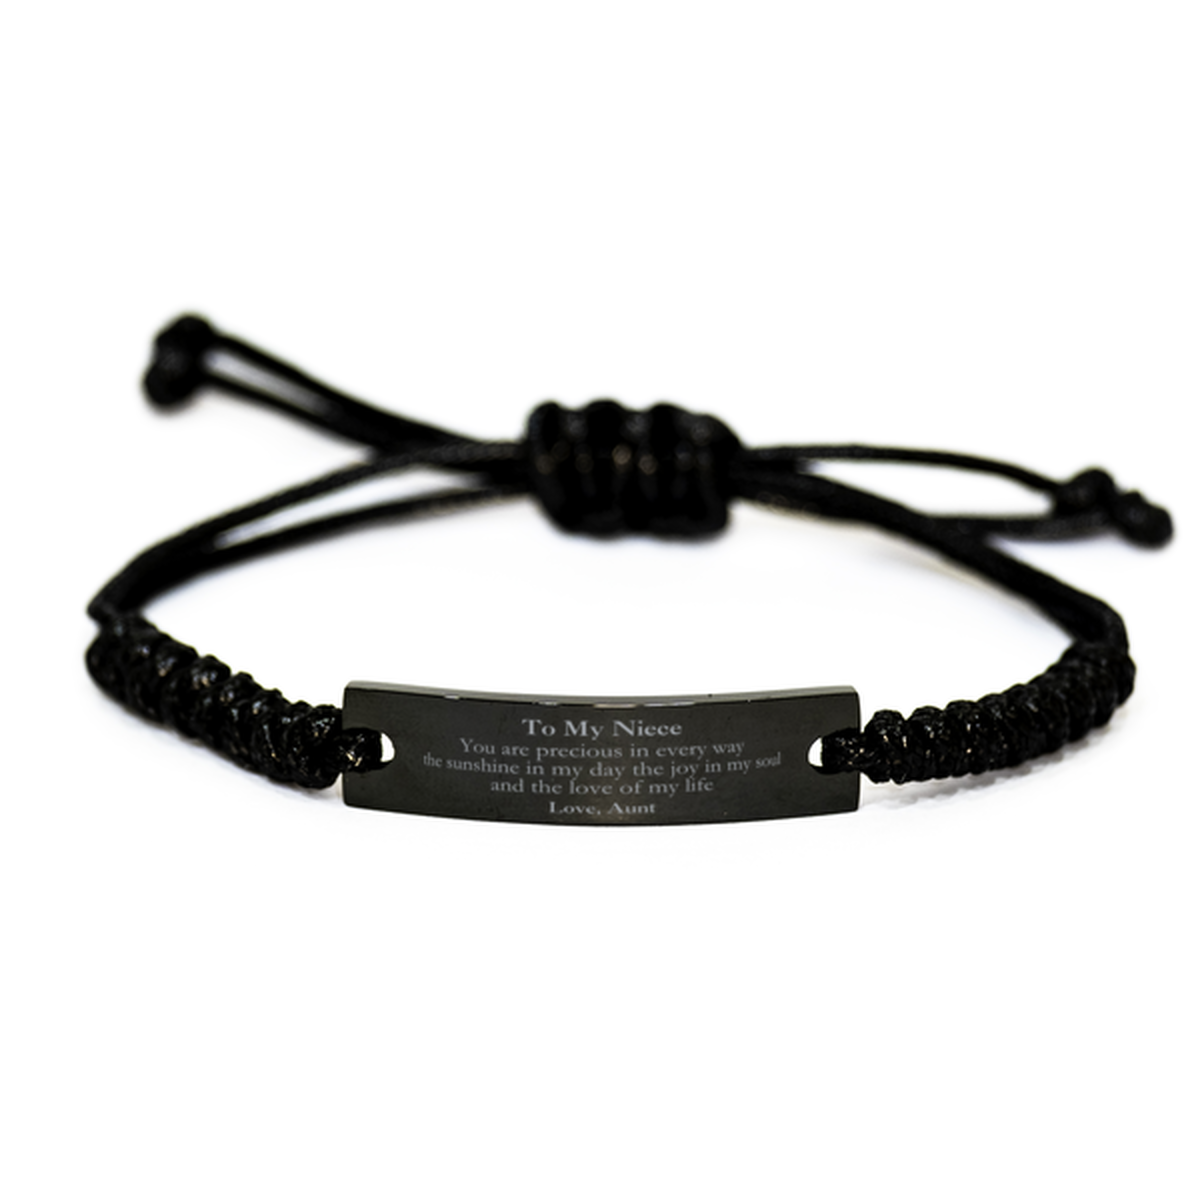 Graduation Gifts for Niece Black Rope Bracelet Present from Aunt, Christmas Niece Birthday Gifts Niece You are precious in every way the sunshine in my day. Love, Aunt